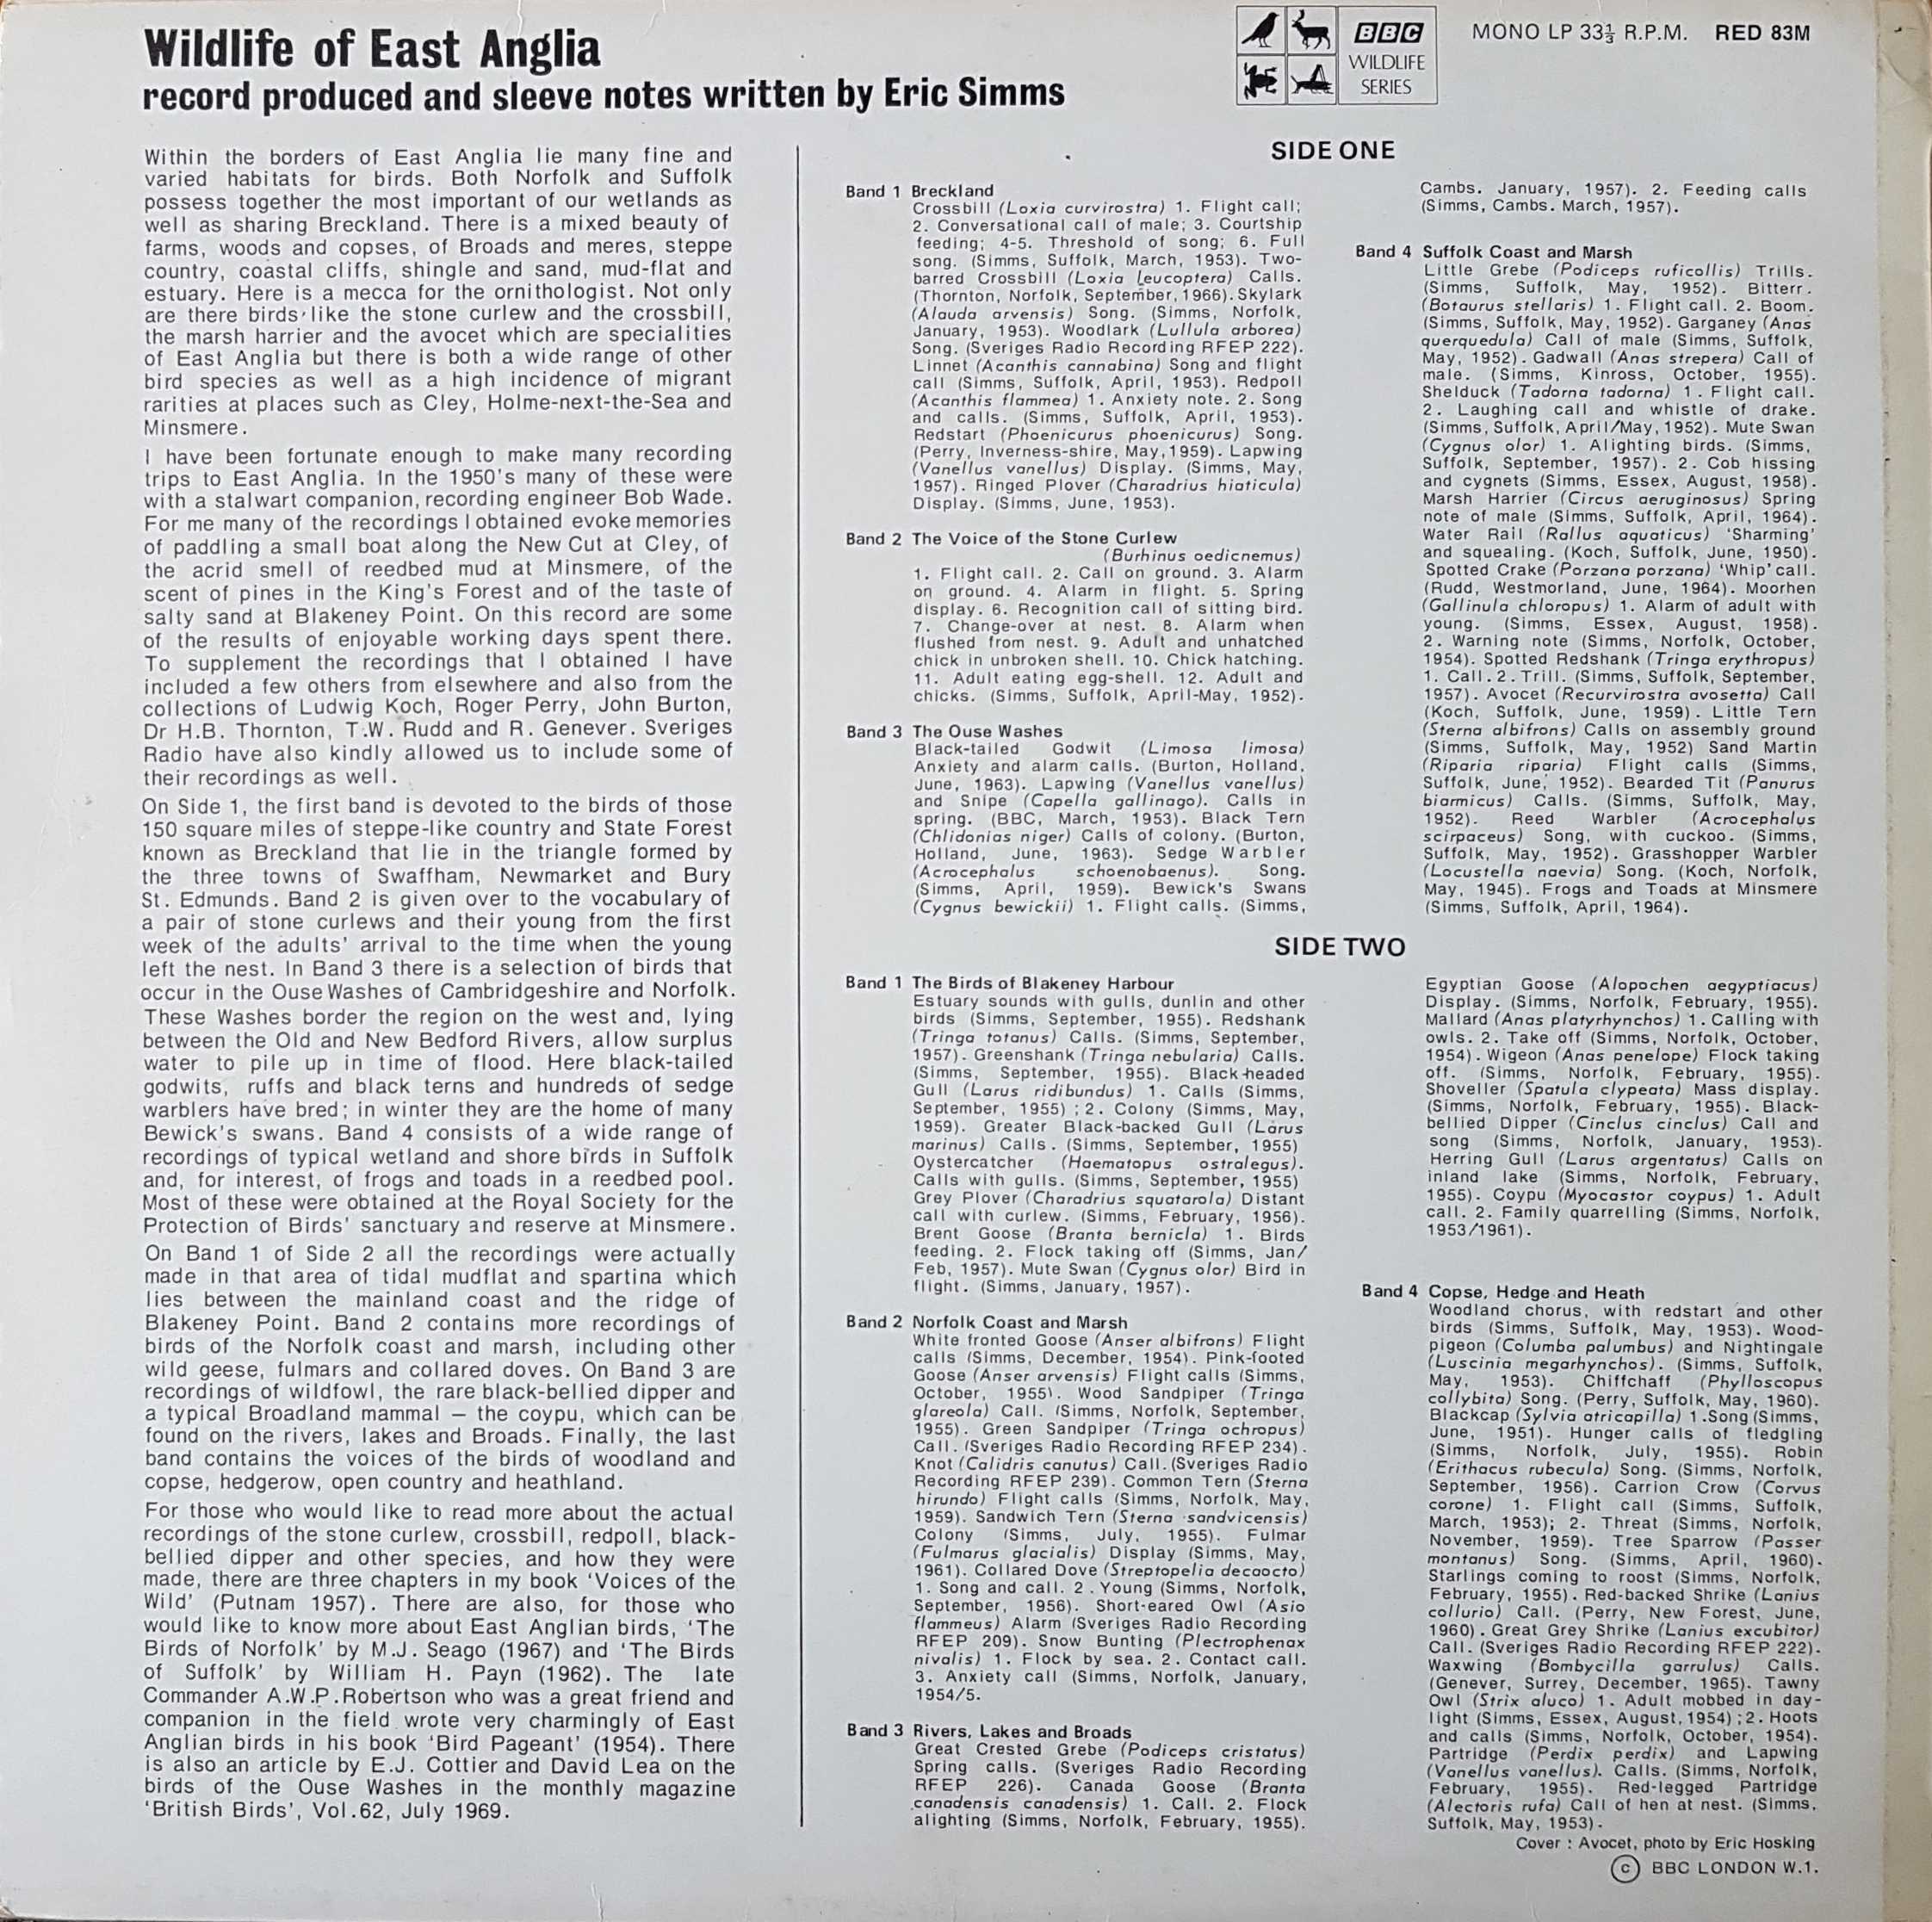 Picture of RED 83 Wildlife of East Anglia by artist Various from the BBC records and Tapes library